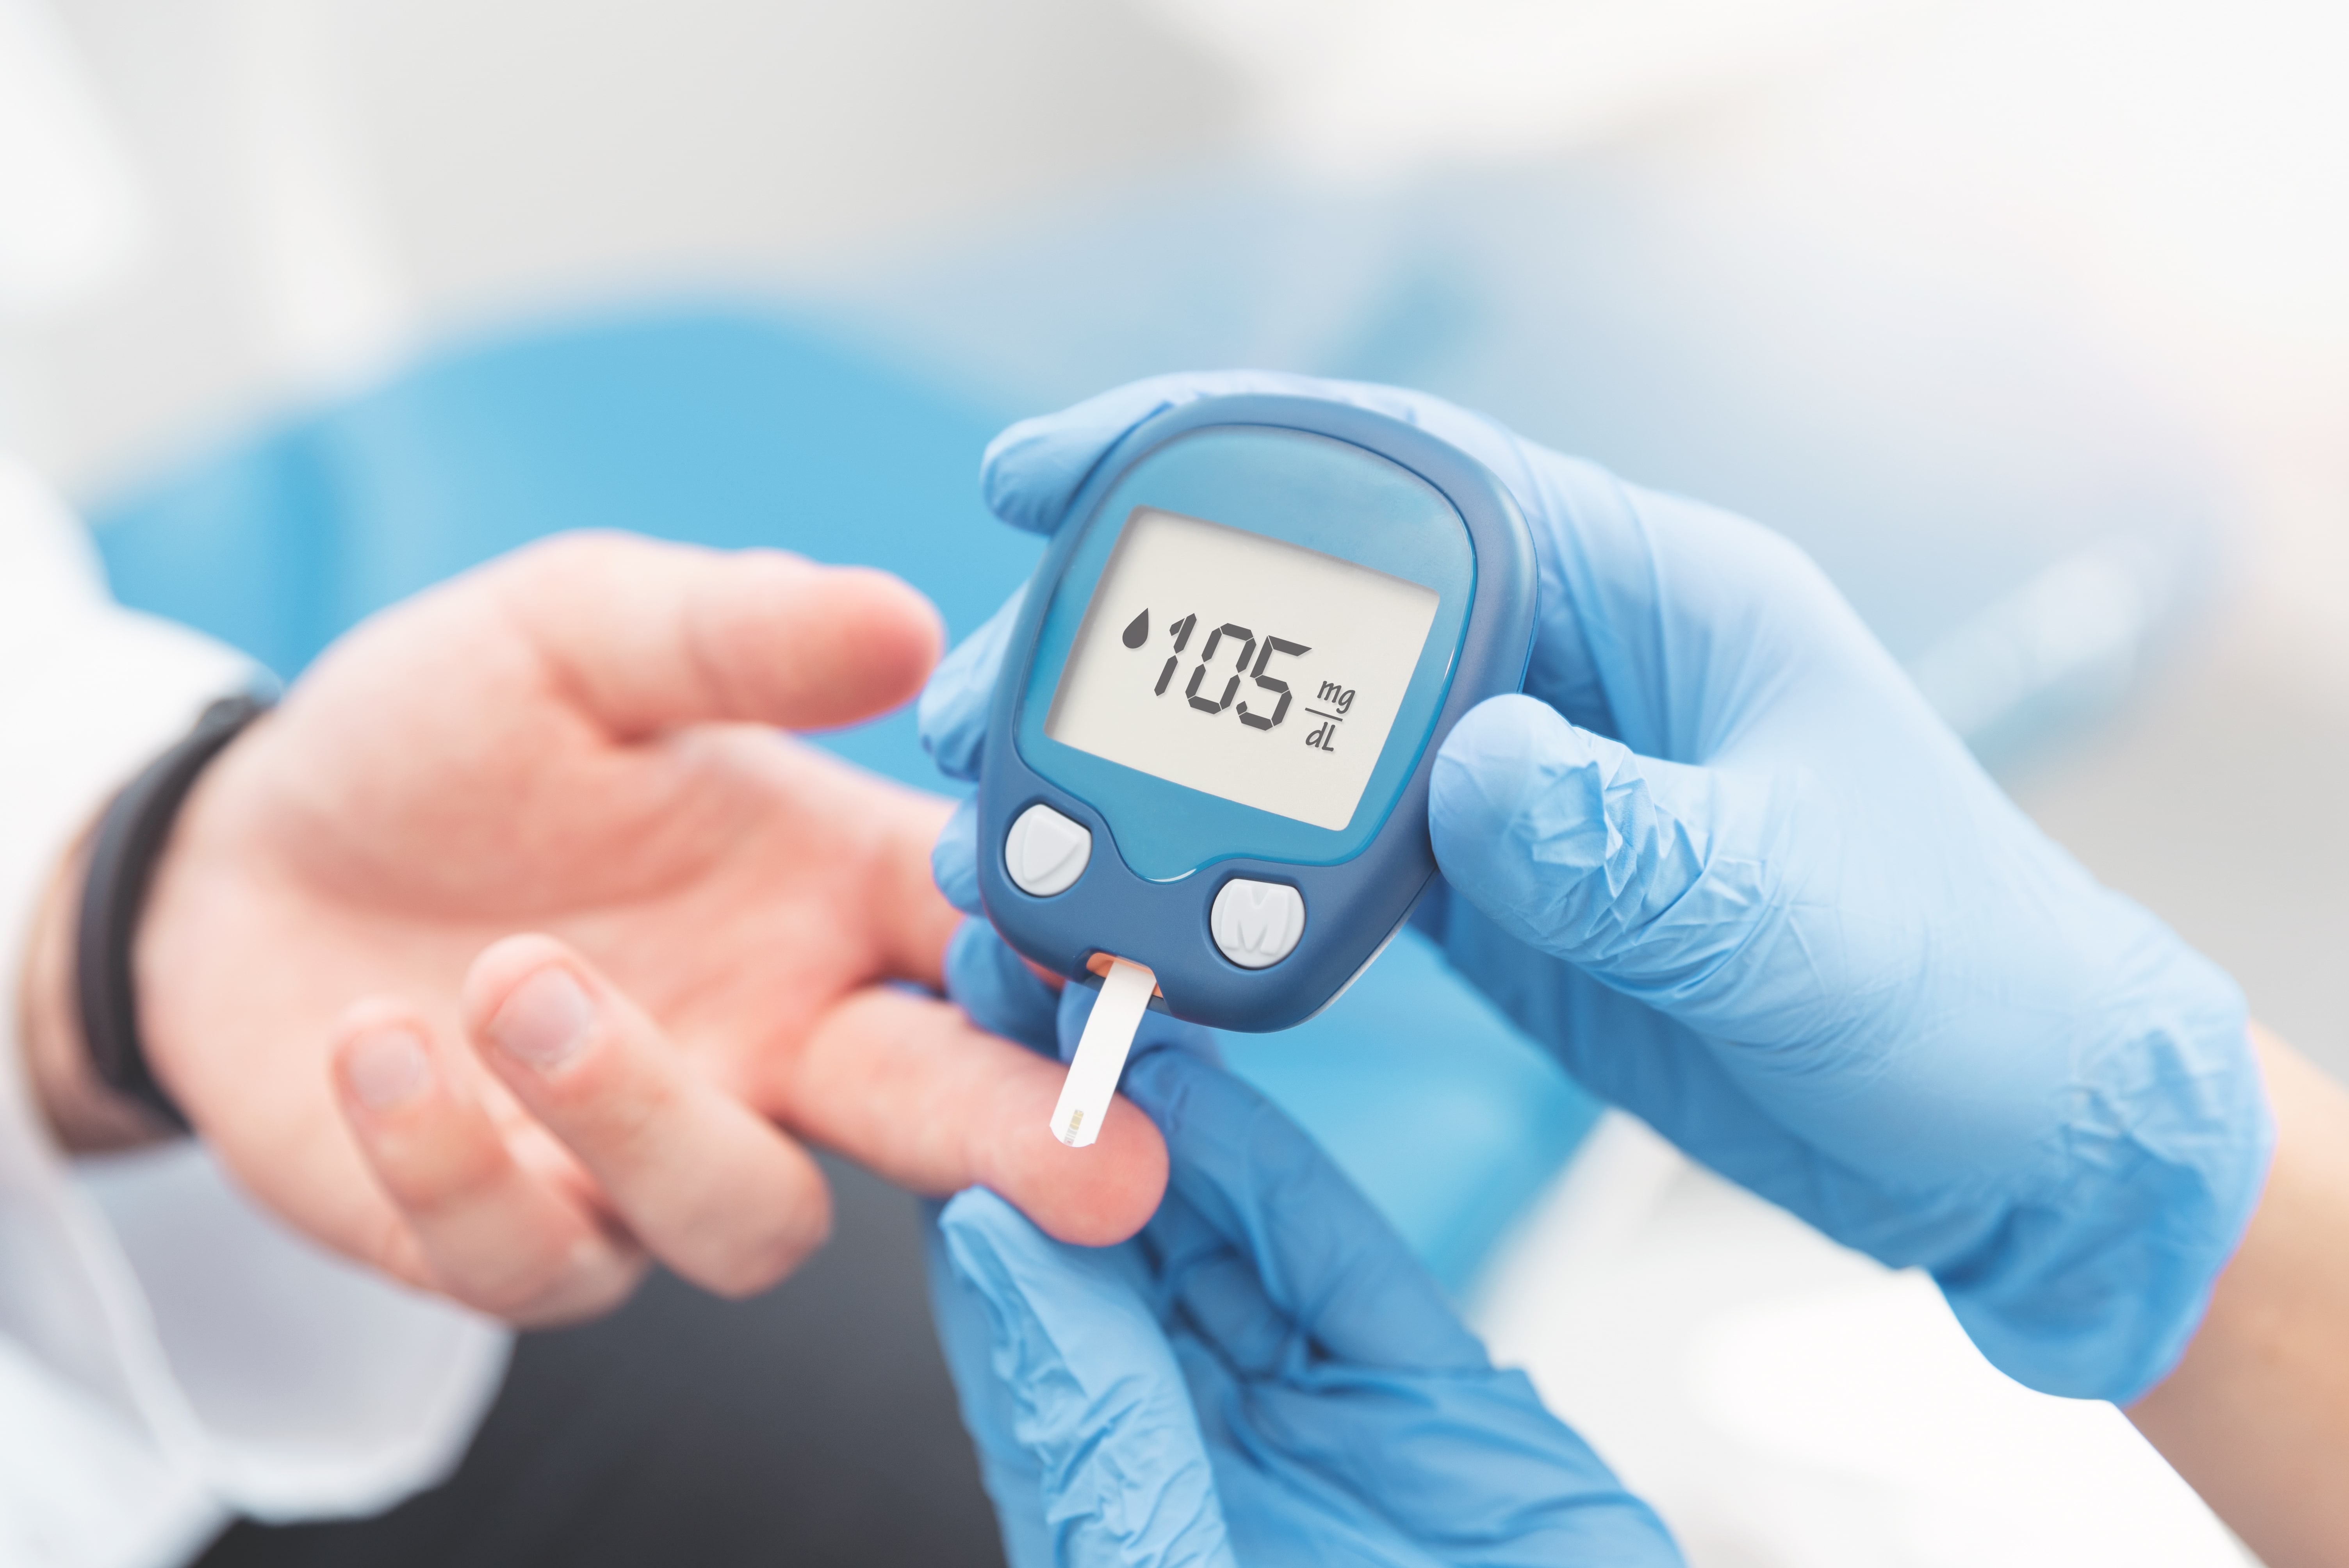 HbA1c scores influence HCPs’ therapy choices